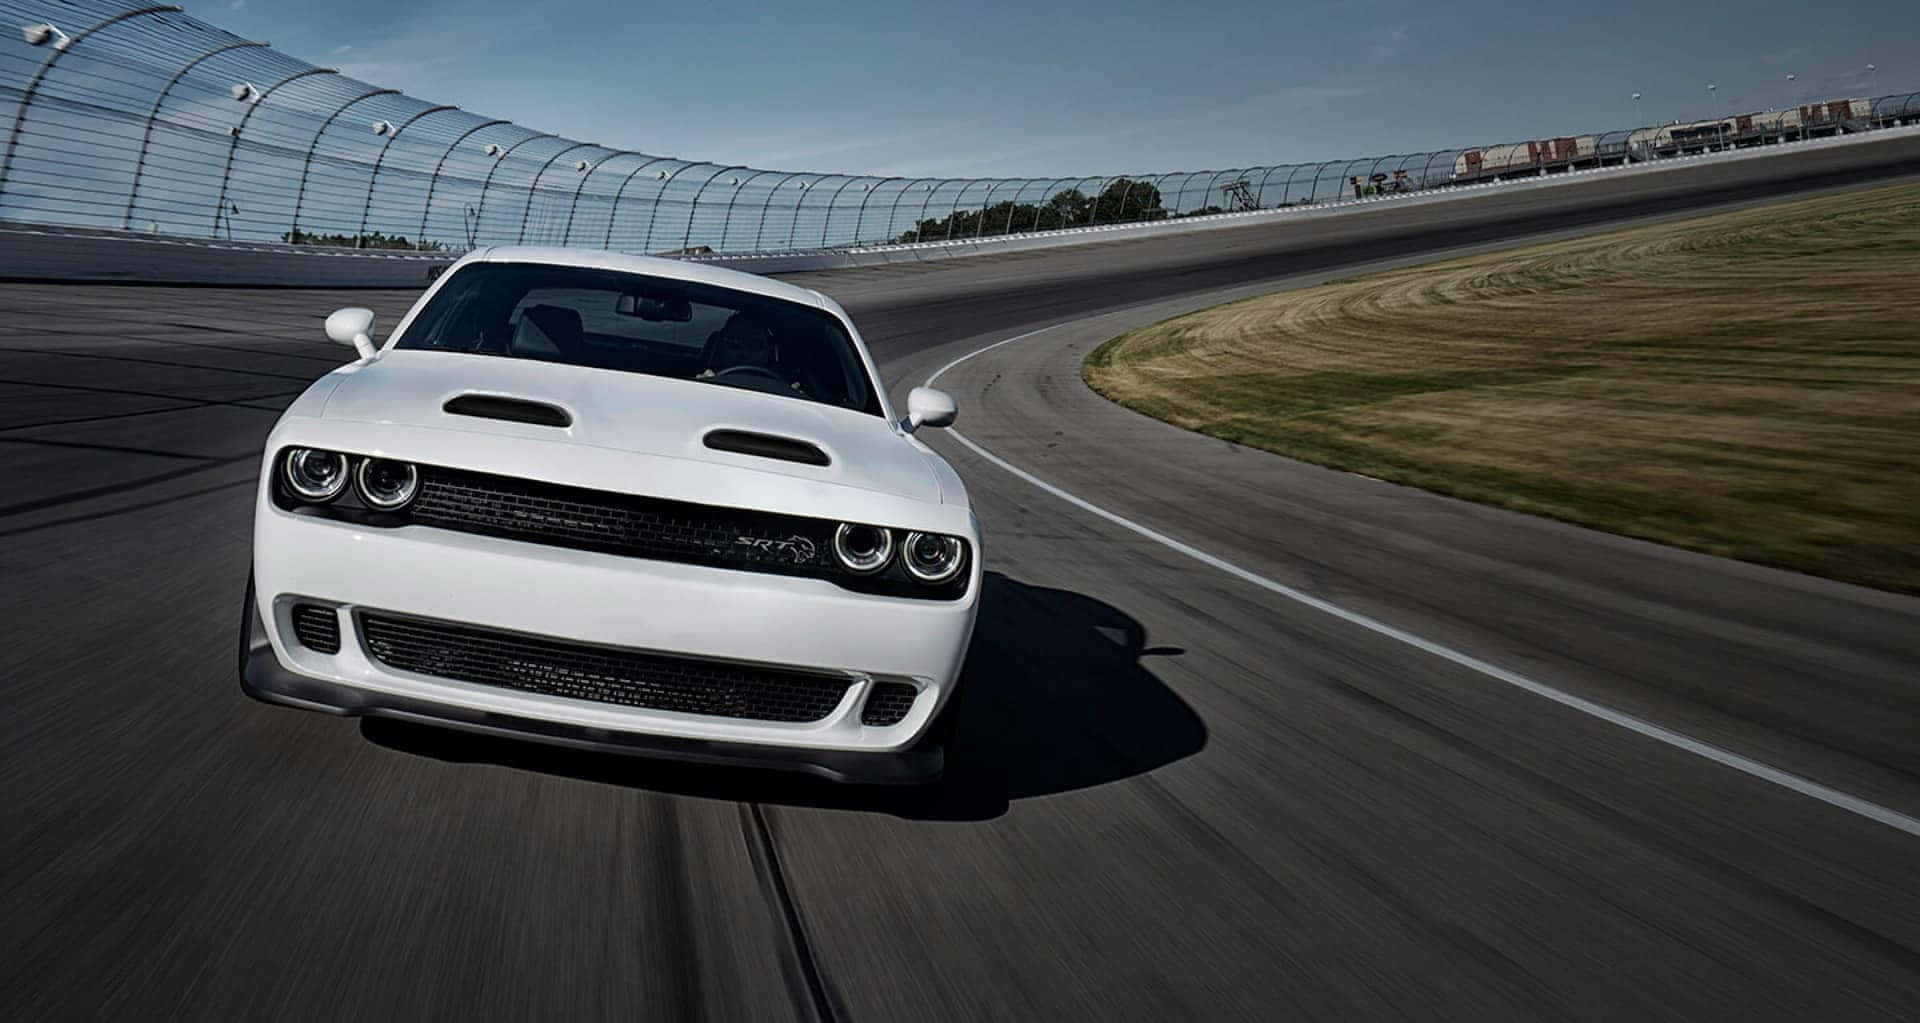 The White Dodge Challenger Is Driving On A Race Track